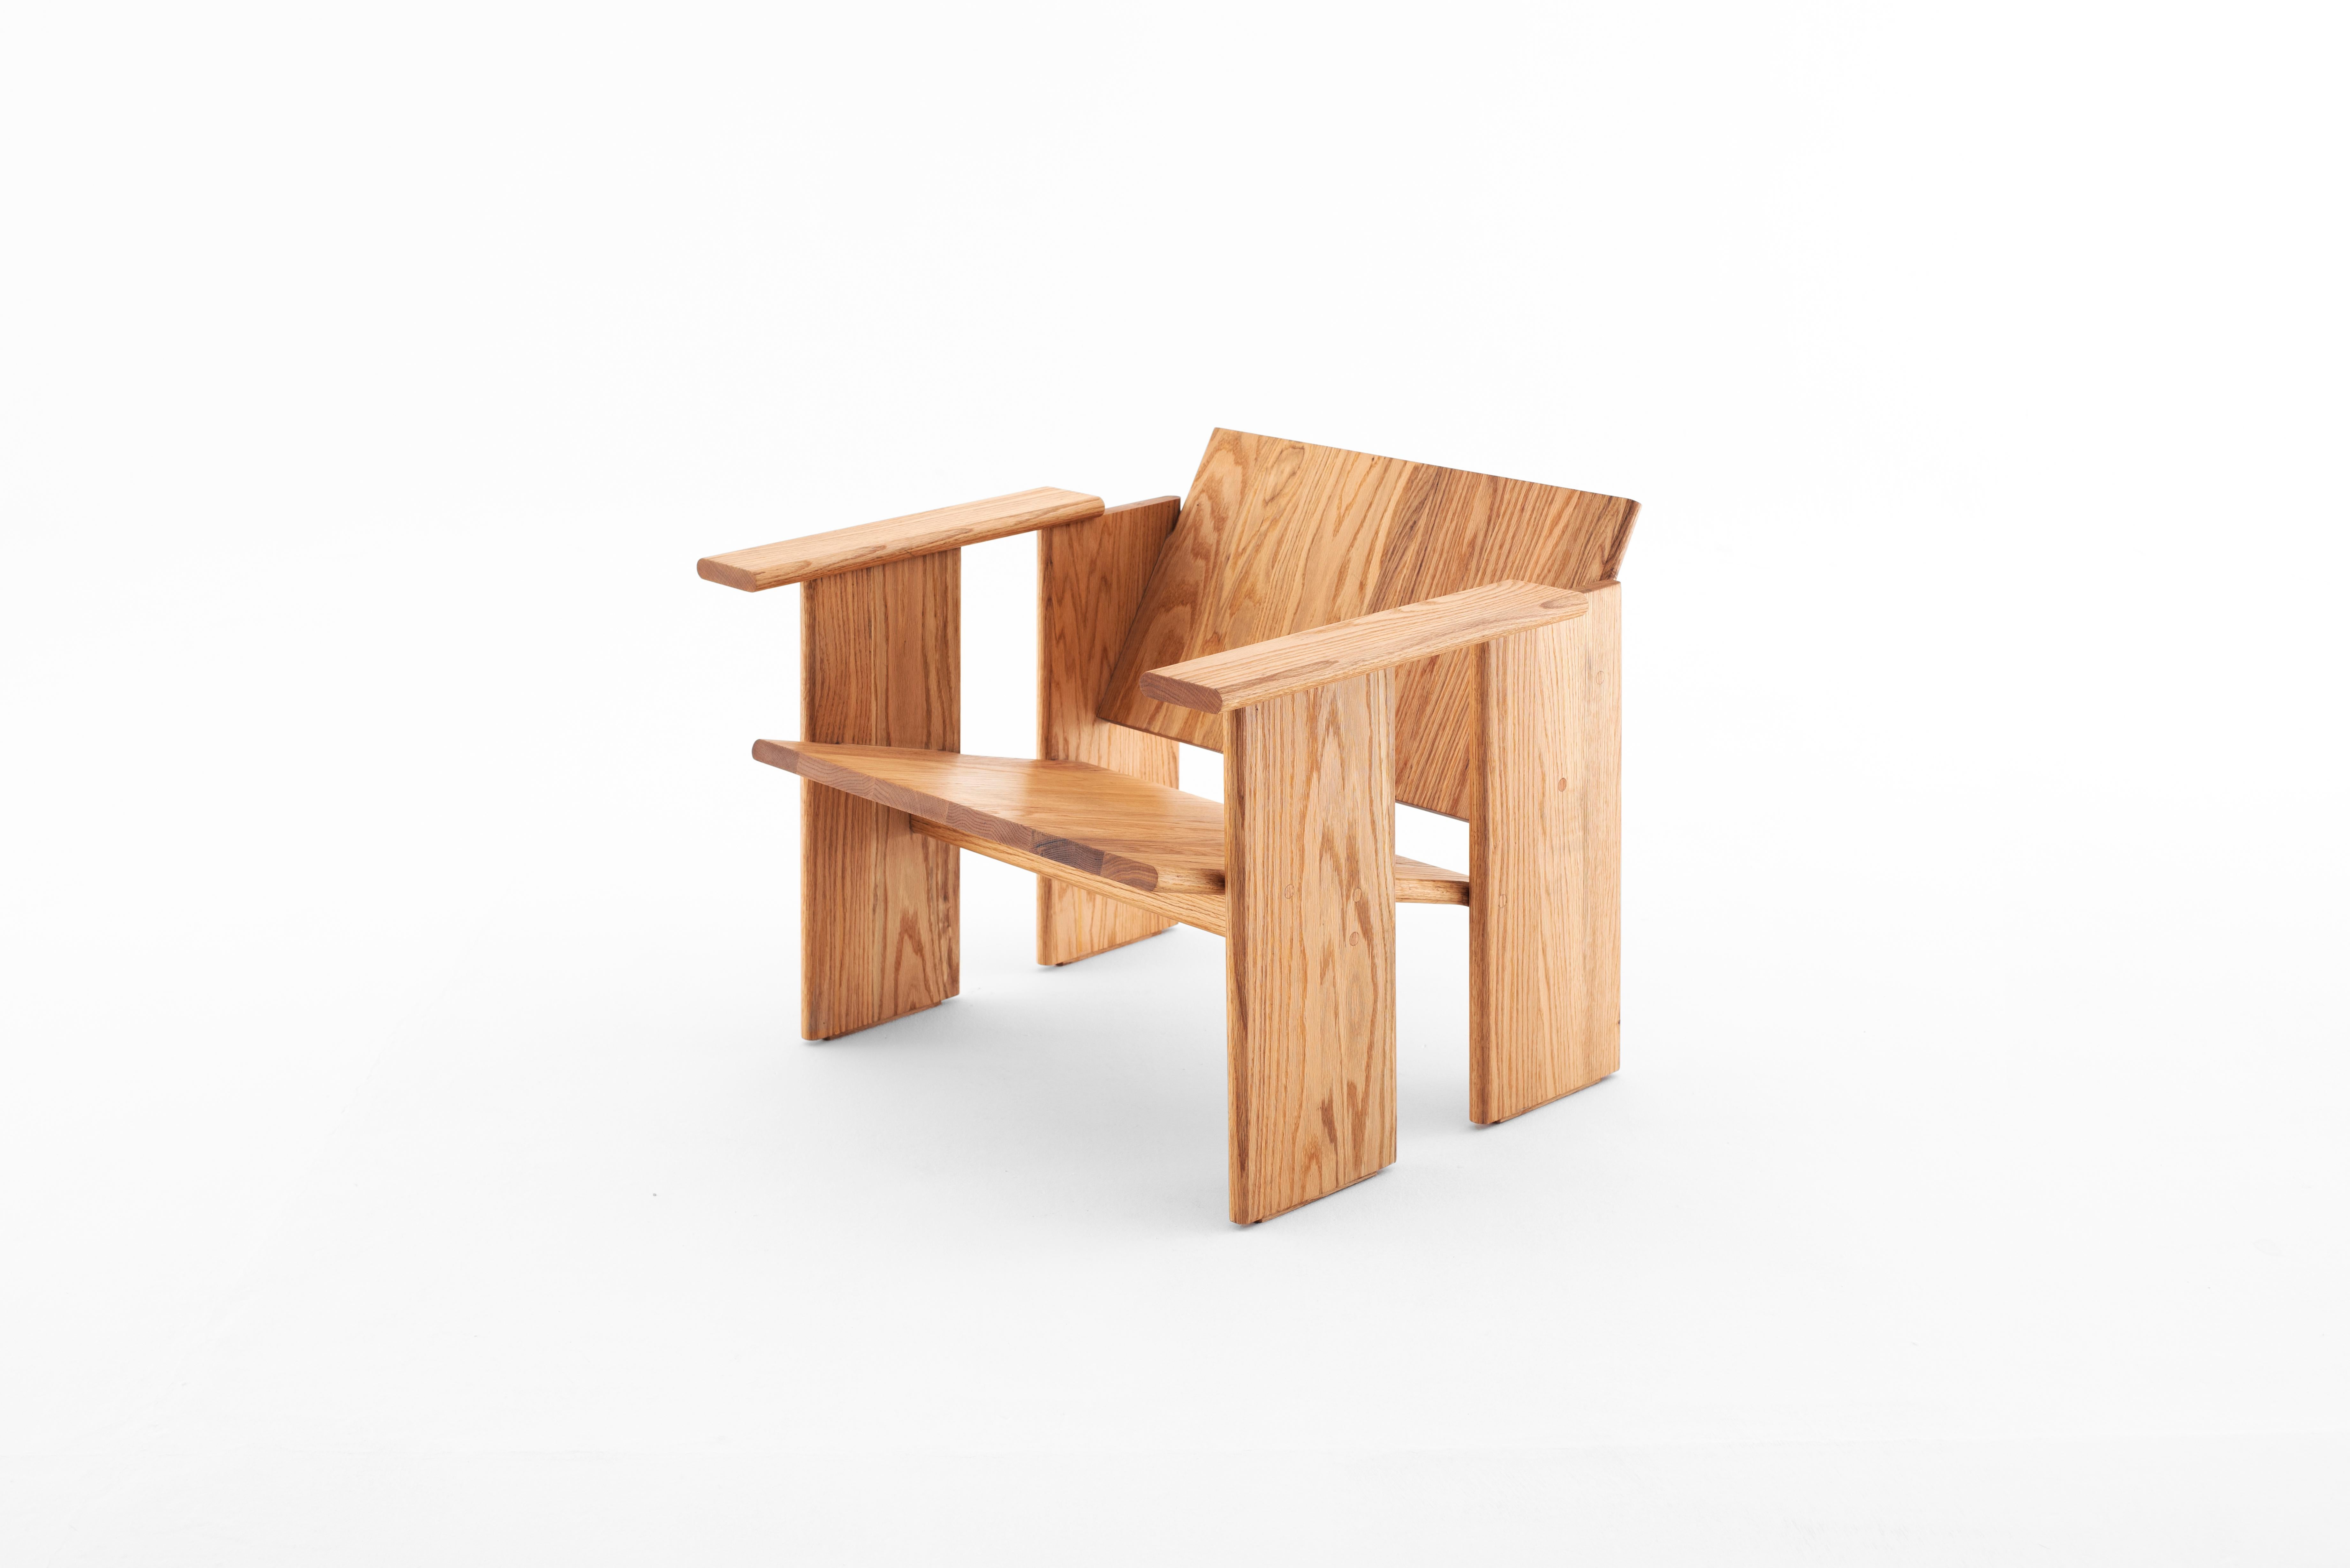 Wood Tumbona Alza, Mexican Contemporary Lounge Chair by Emiliano Molina for Cuchara For Sale